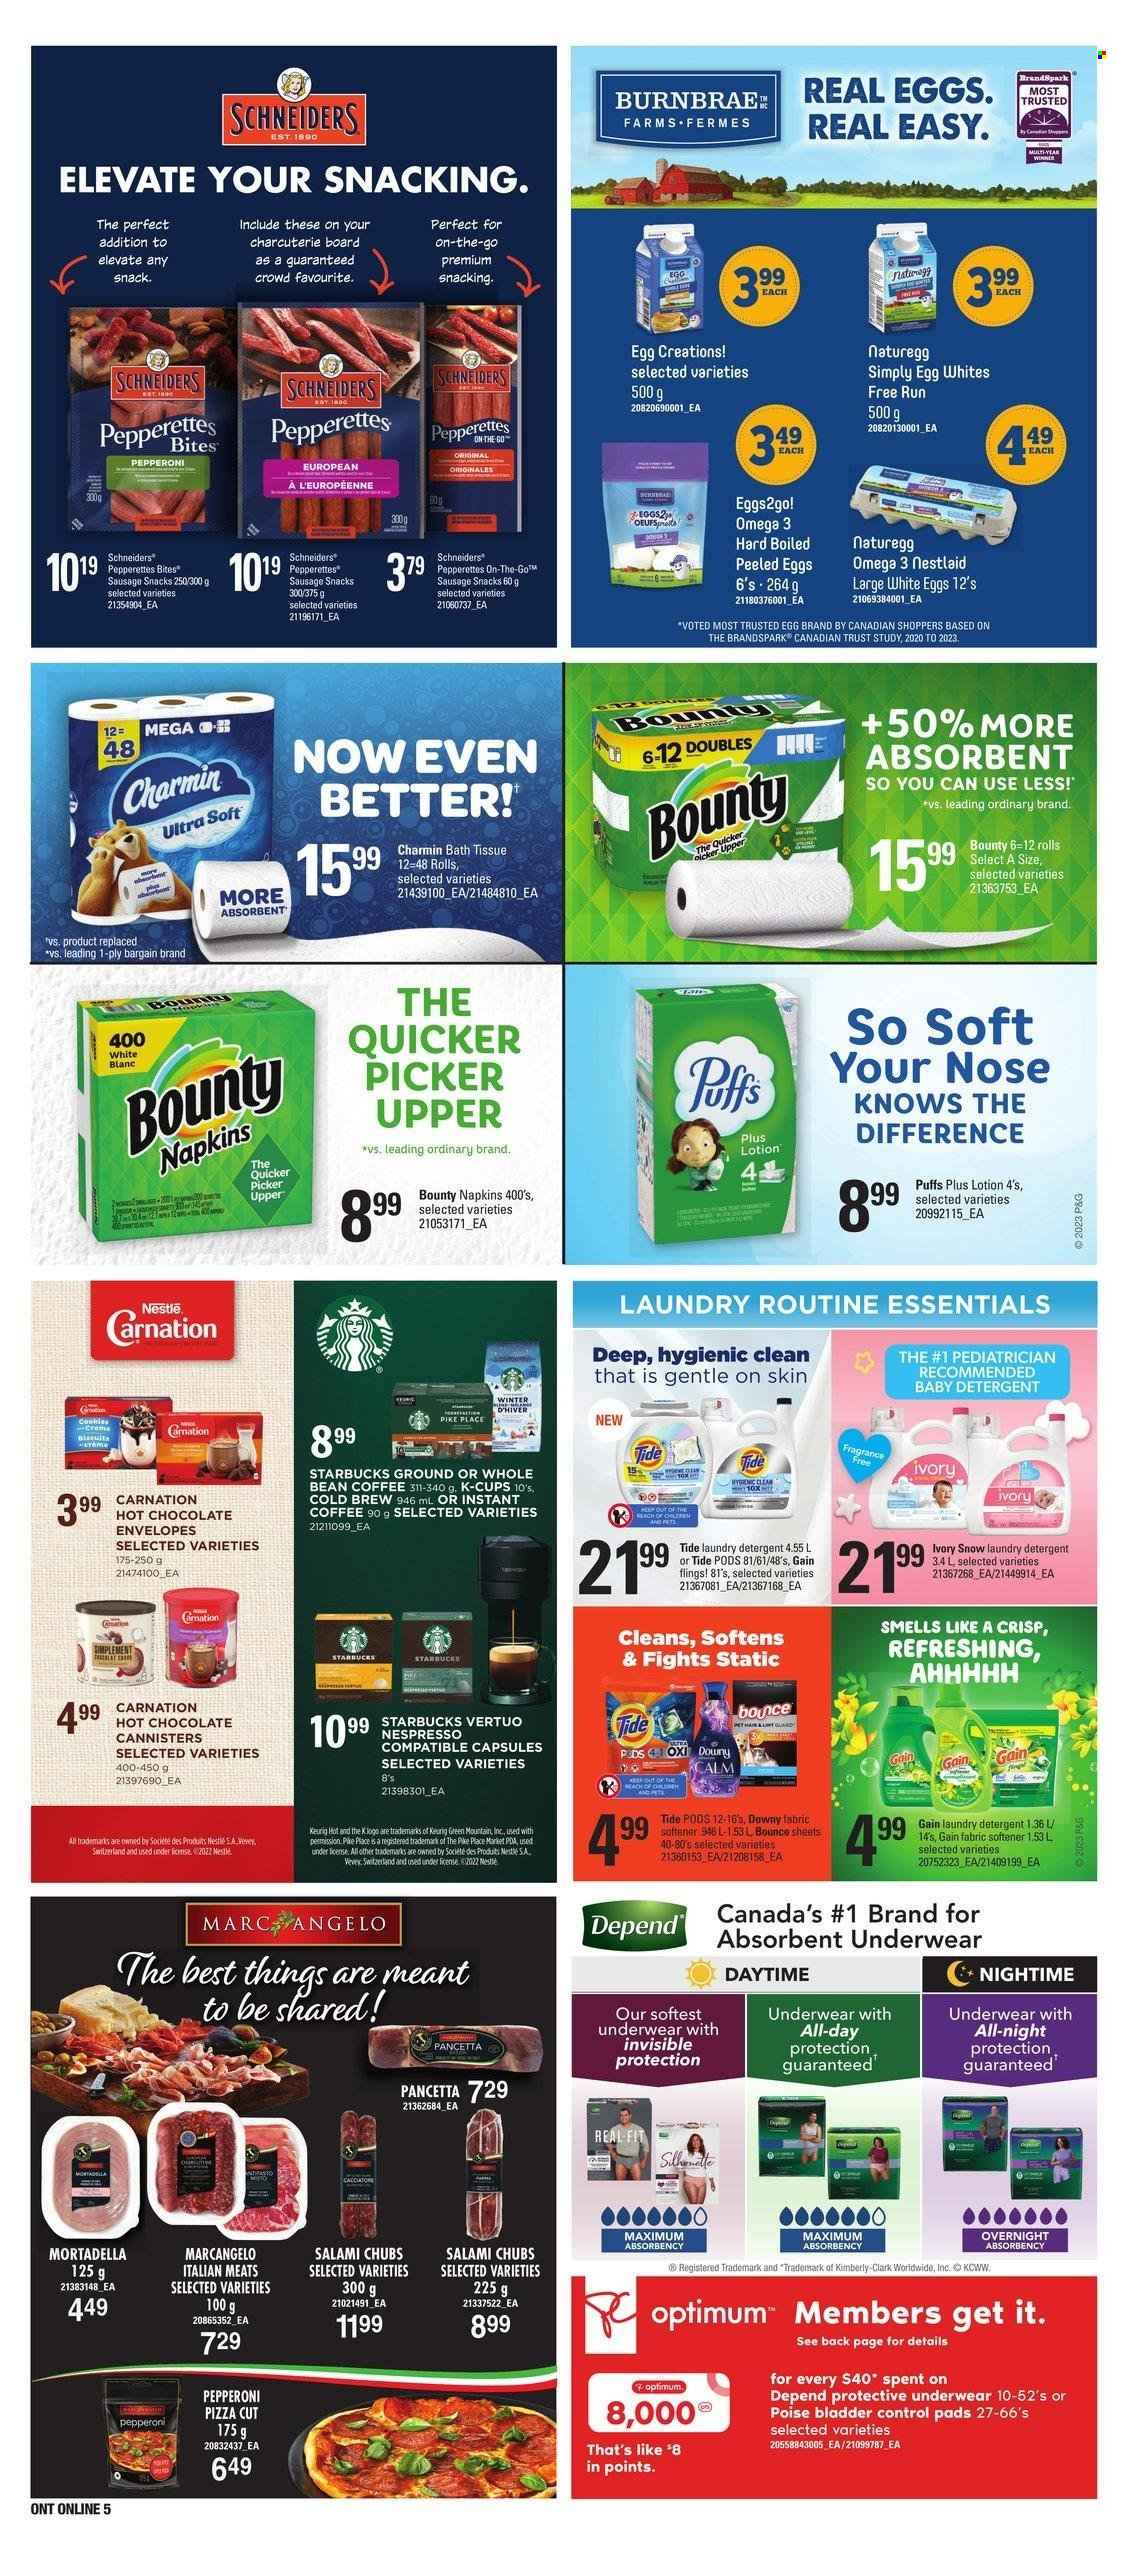 thumbnail - Loblaws Flyer - January 26, 2023 - February 01, 2023 - Sales products - puffs, pizza, mortadella, salami, sausage, pepperoni, eggs, snack, Bounty, hot chocolate, coffee, instant coffee, Nespresso, coffee capsules, Starbucks, K-Cups, Keurig, Green Mountain, napkins, bath tissue, Charmin, Gain, Tide, fabric softener, laundry detergent, Bounce, Downy Laundry, fragrance, Trust, Optimum, TV, Omega-3, detergent, Nestlé, pancetta. Page 13.